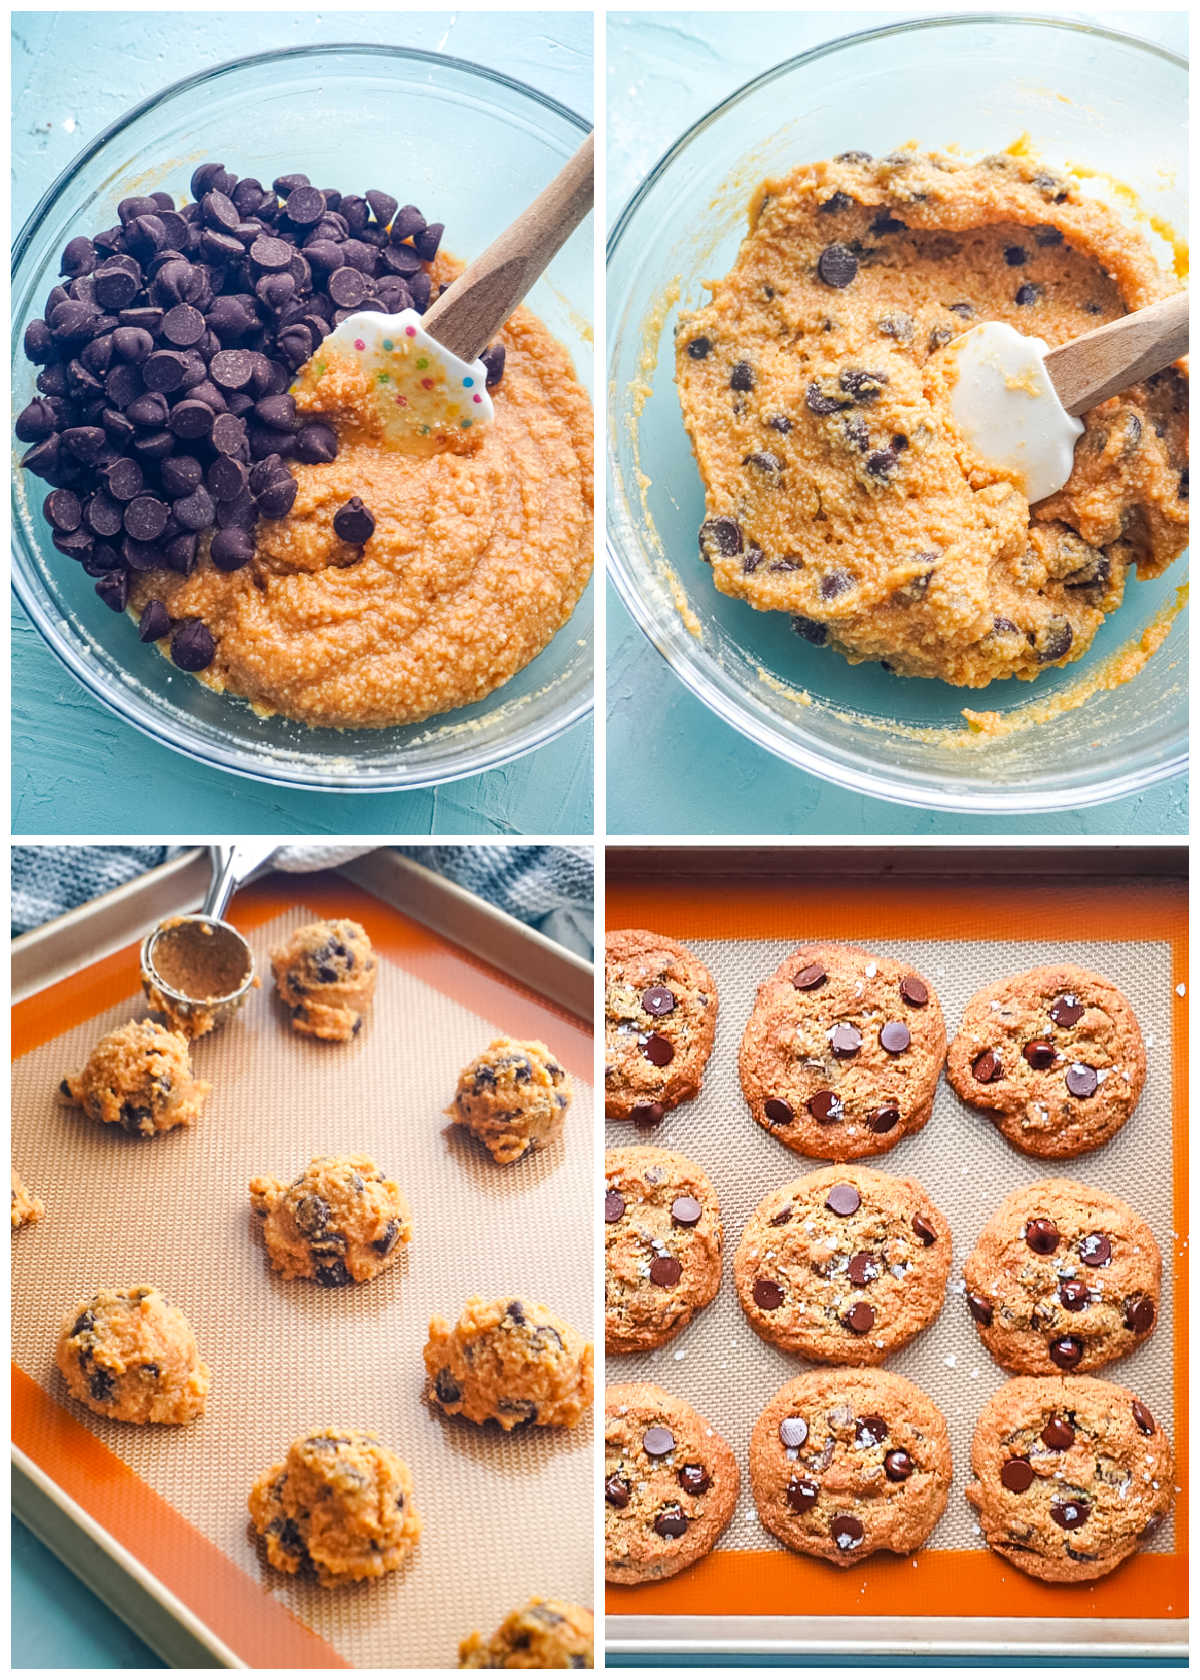 A picture collage showing how to make this almond flour chocolate chip cookie recipe.